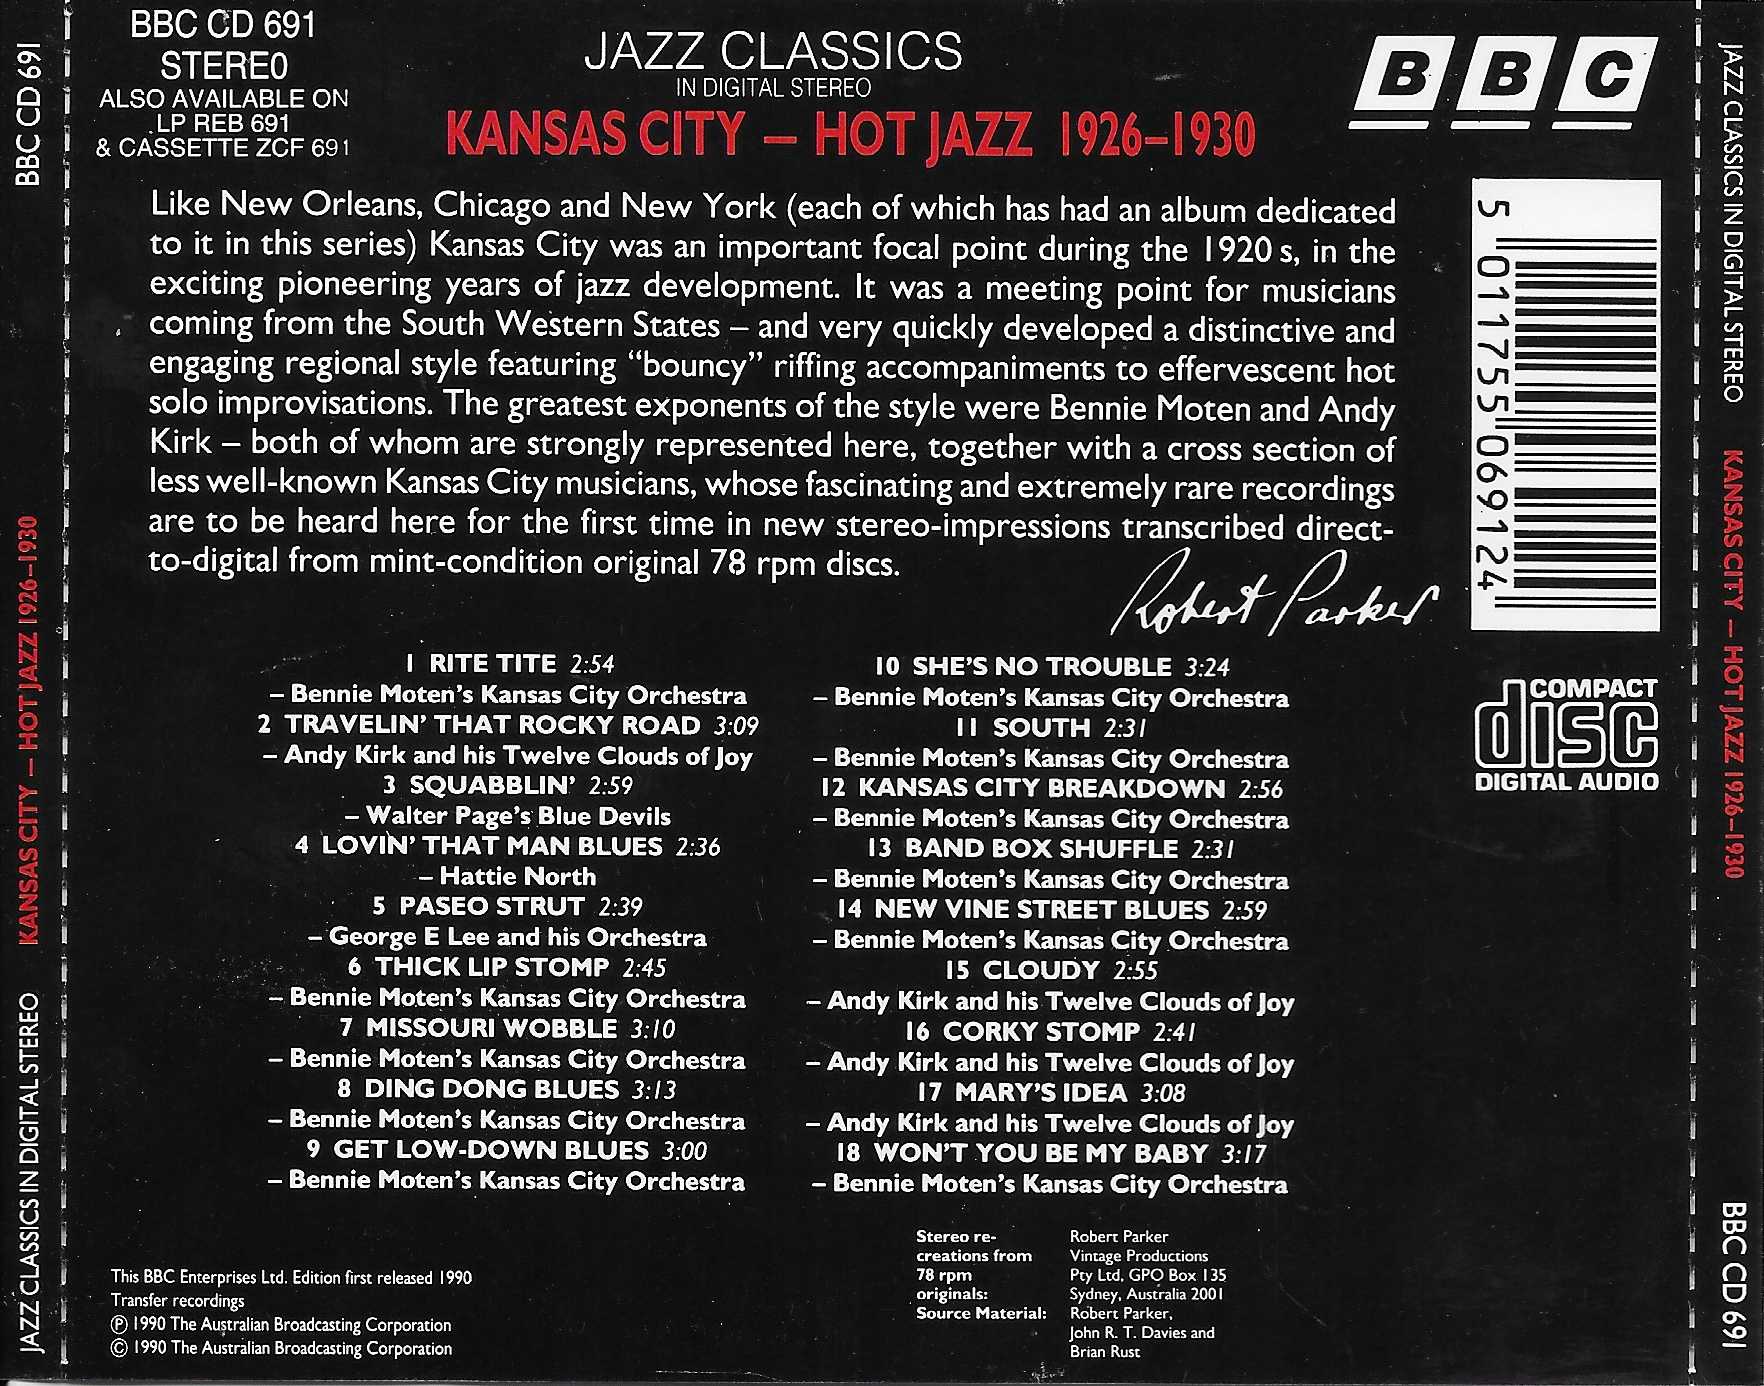 Back cover of BBCCD691